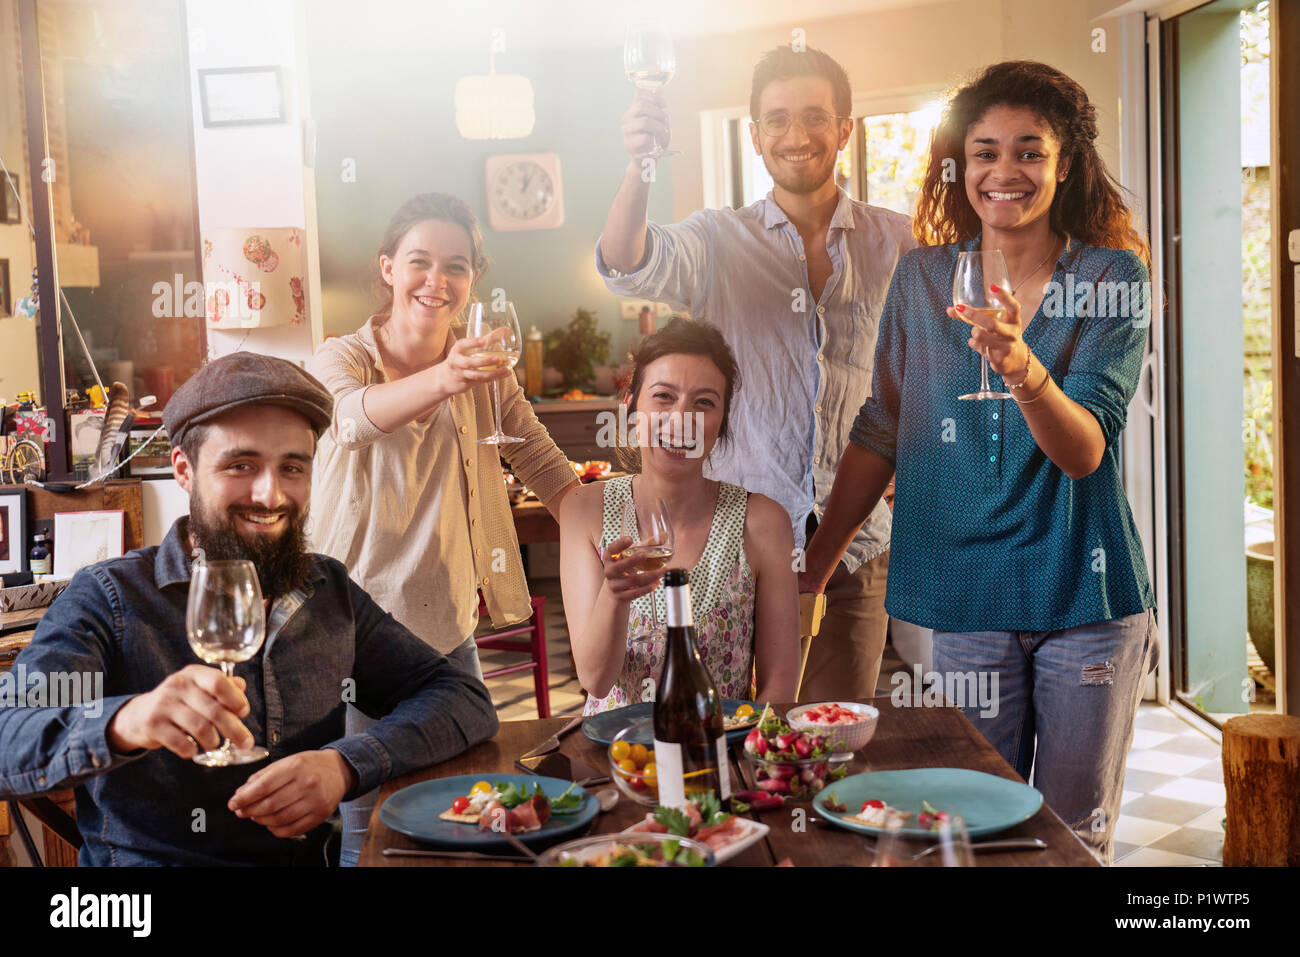 Mixed group of friends having fun while sharing a meal  Stock Photo